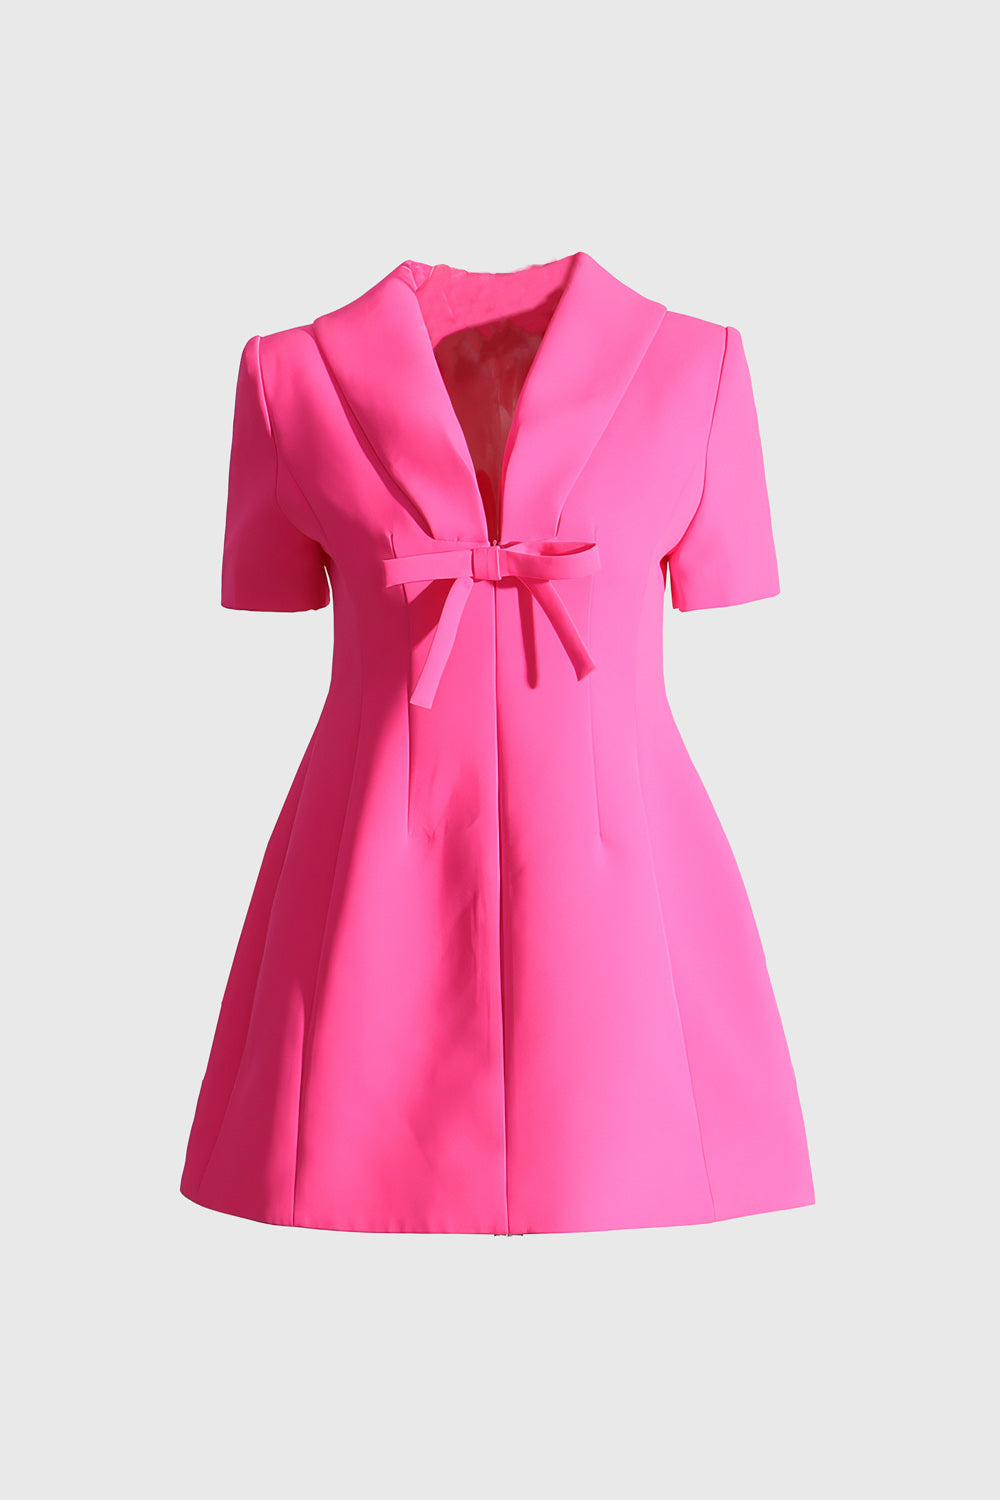 Mini Dress with Bow and Short Sleeves - Fuchsia